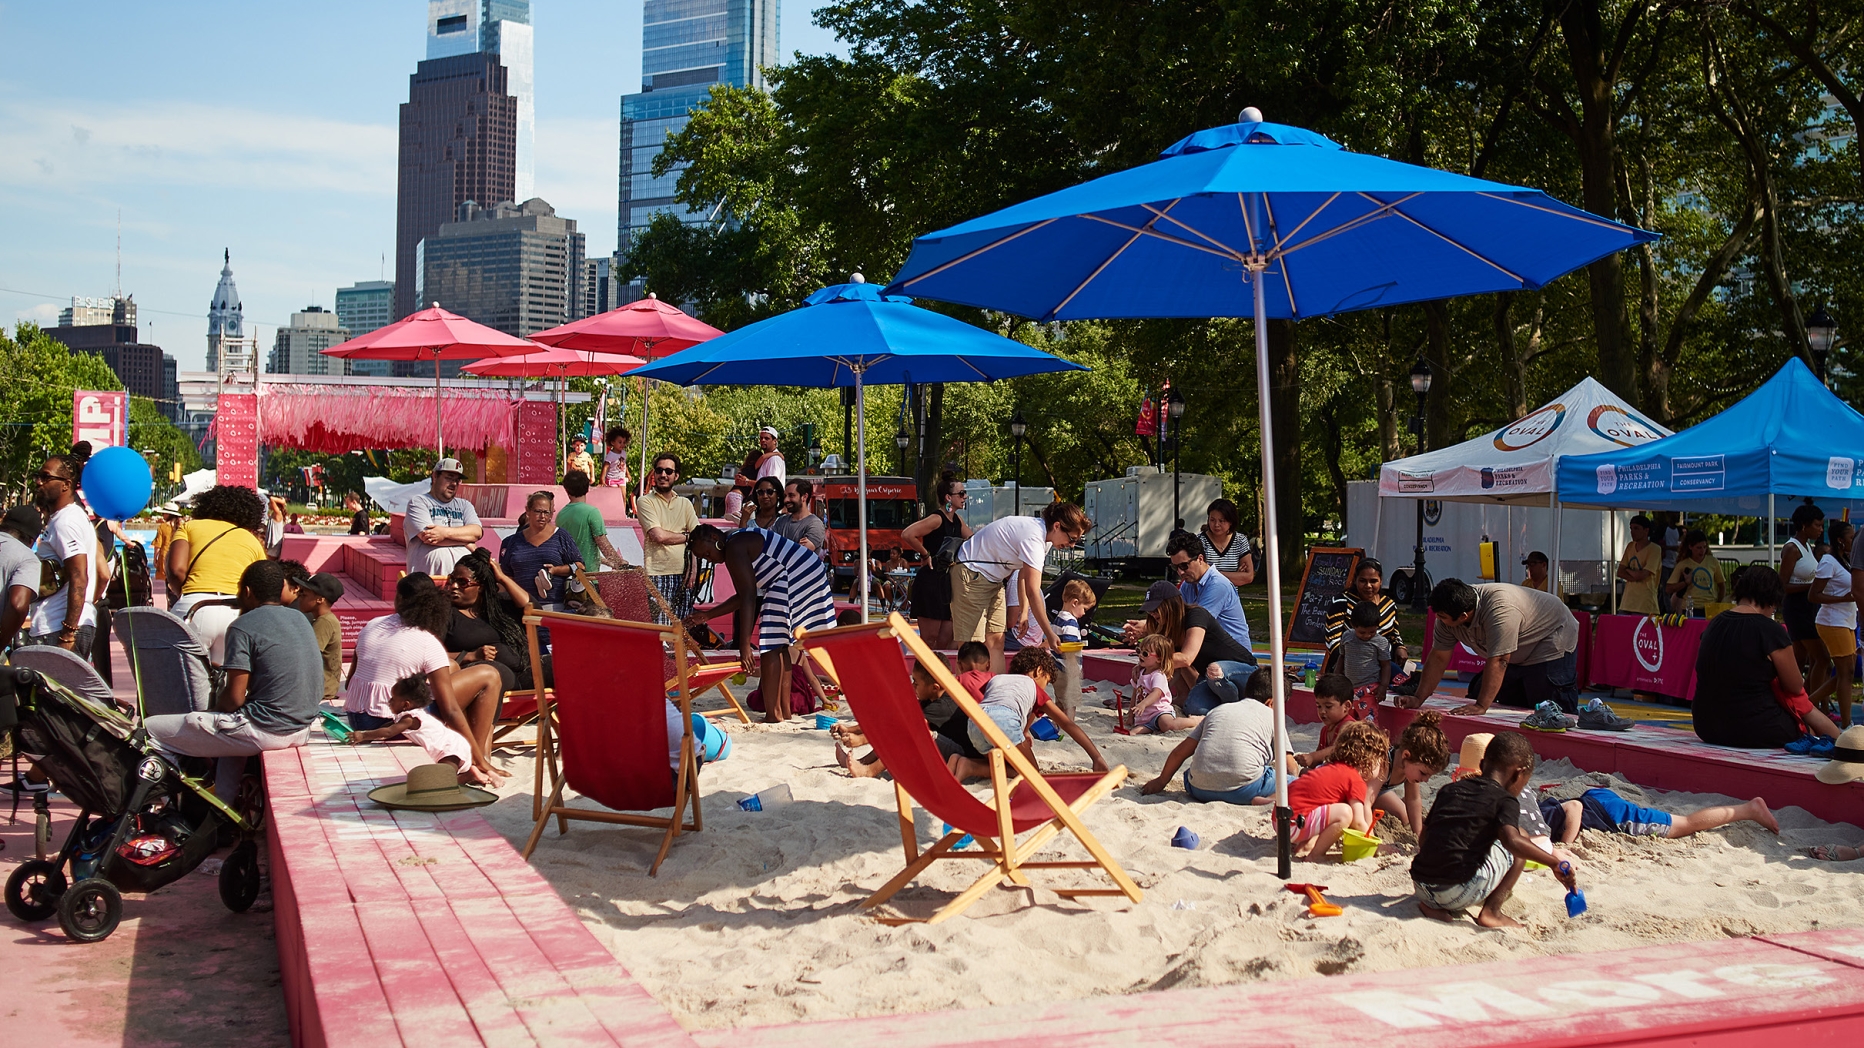 Sand box with beach chairs, parasol and people hanging out. Philadelphia skyline in background